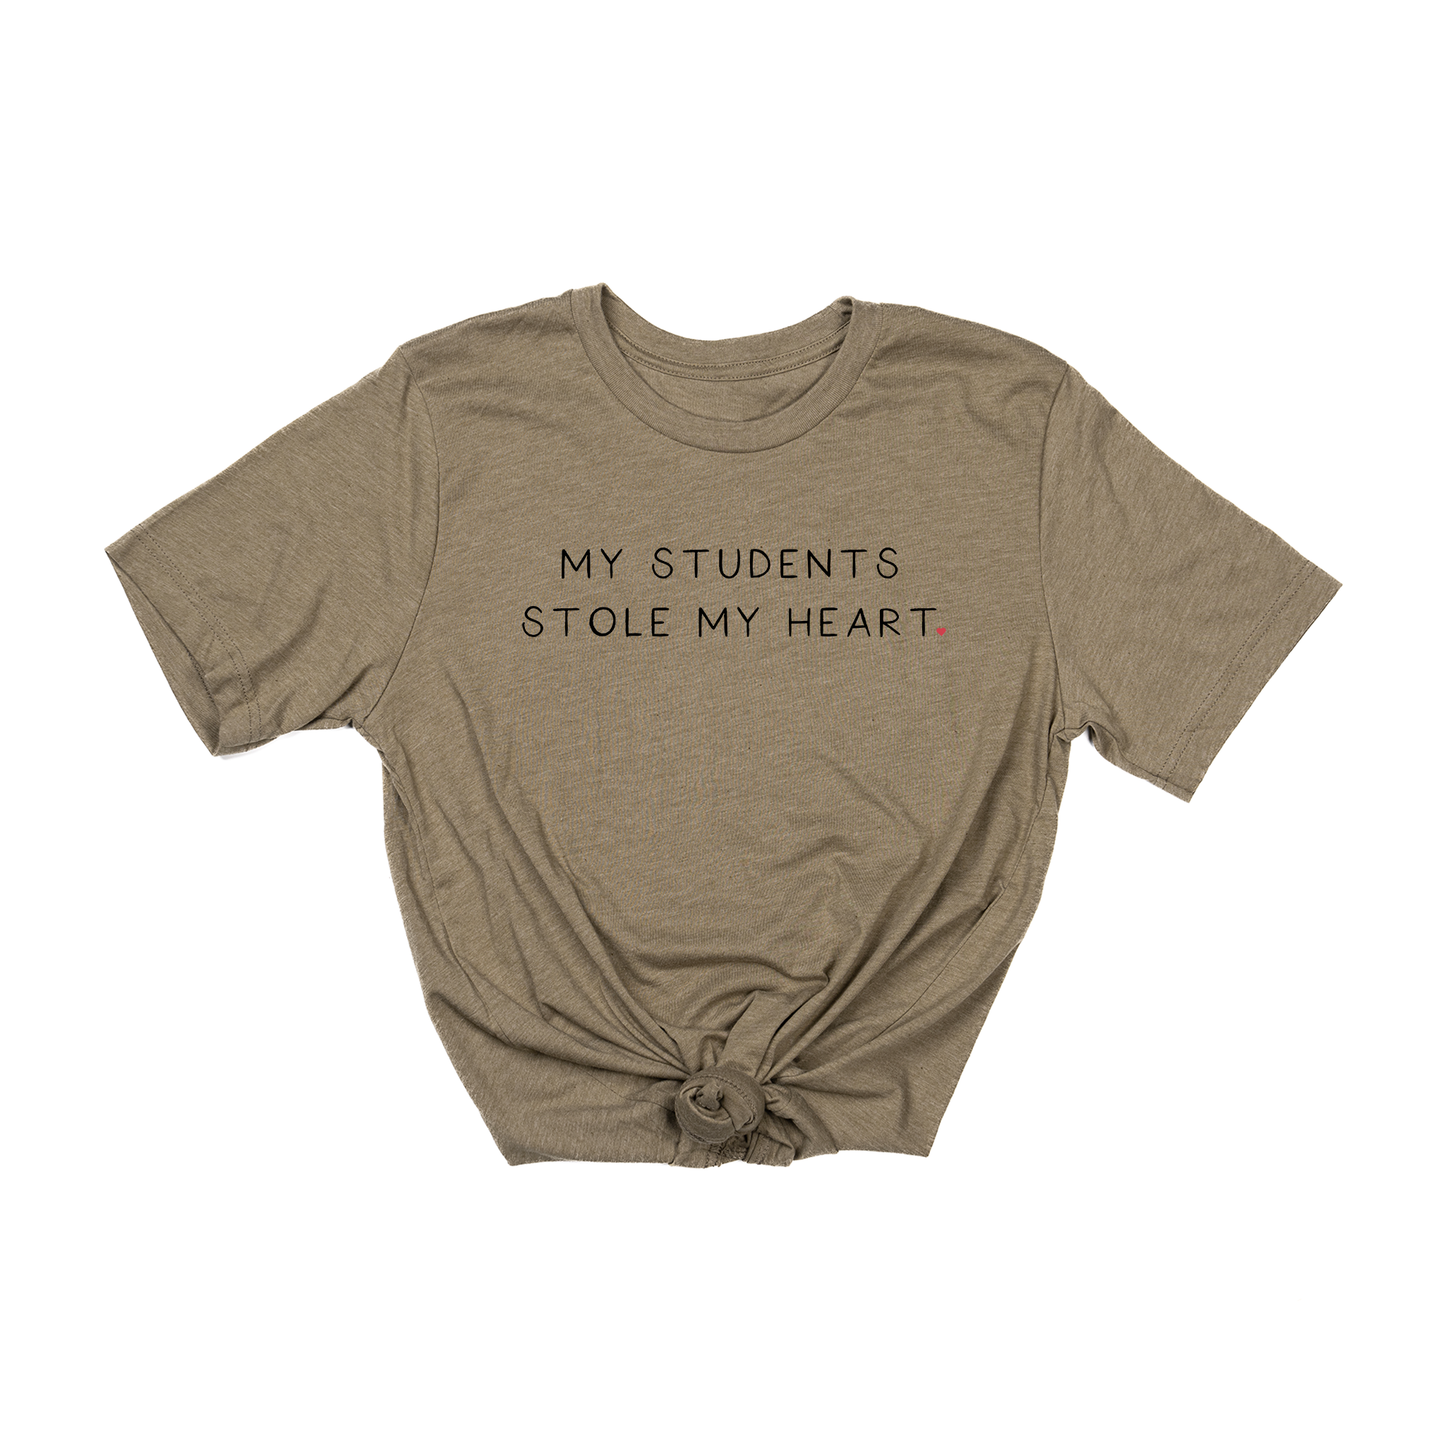 My Students Stole My Heart (Black) - Tee (Olive)